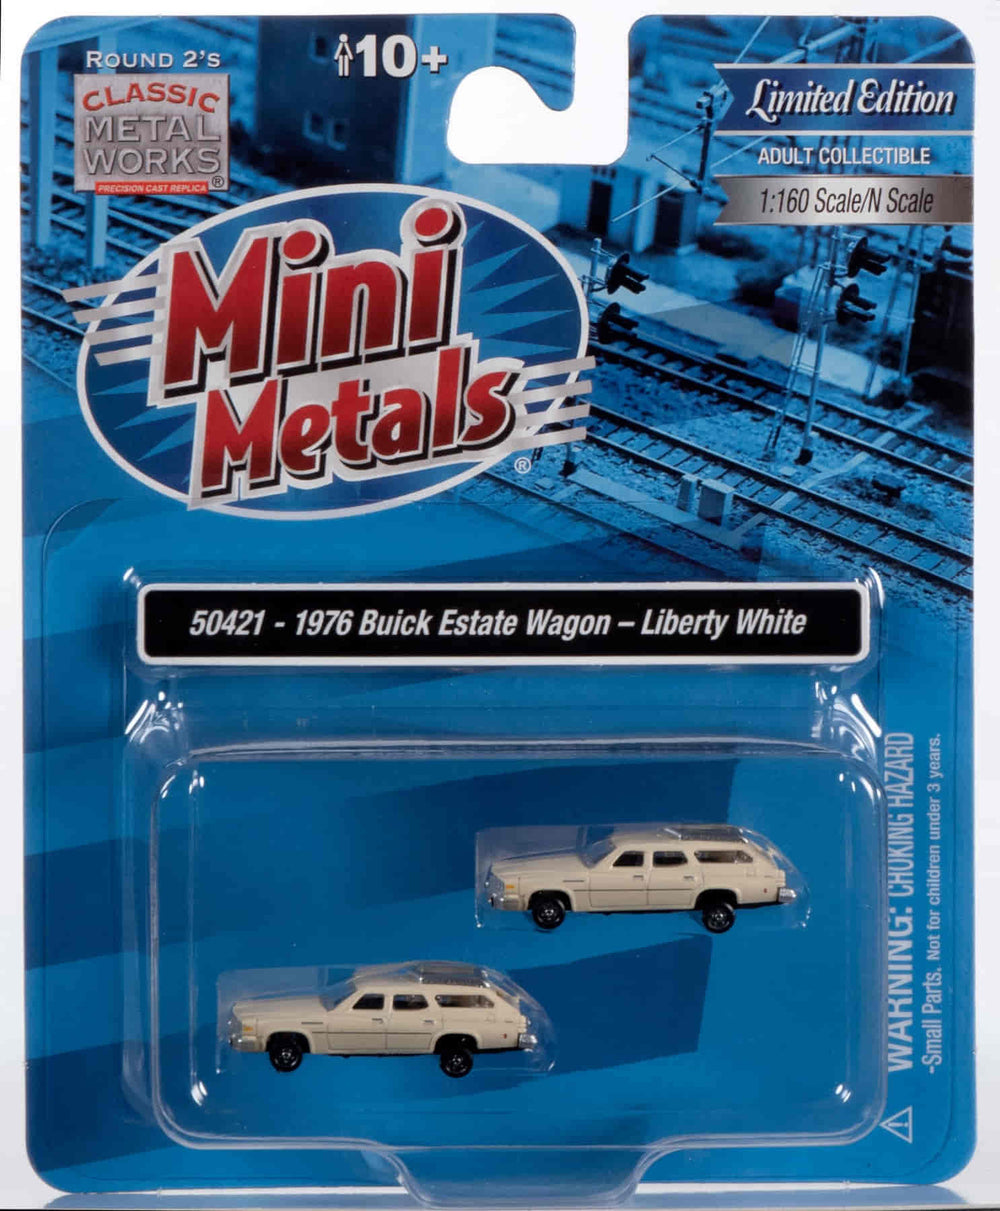 Classic Metal Works 1976 Buick Estate Wagon (Liberty White) (2-Pack) 1:160 N Scale